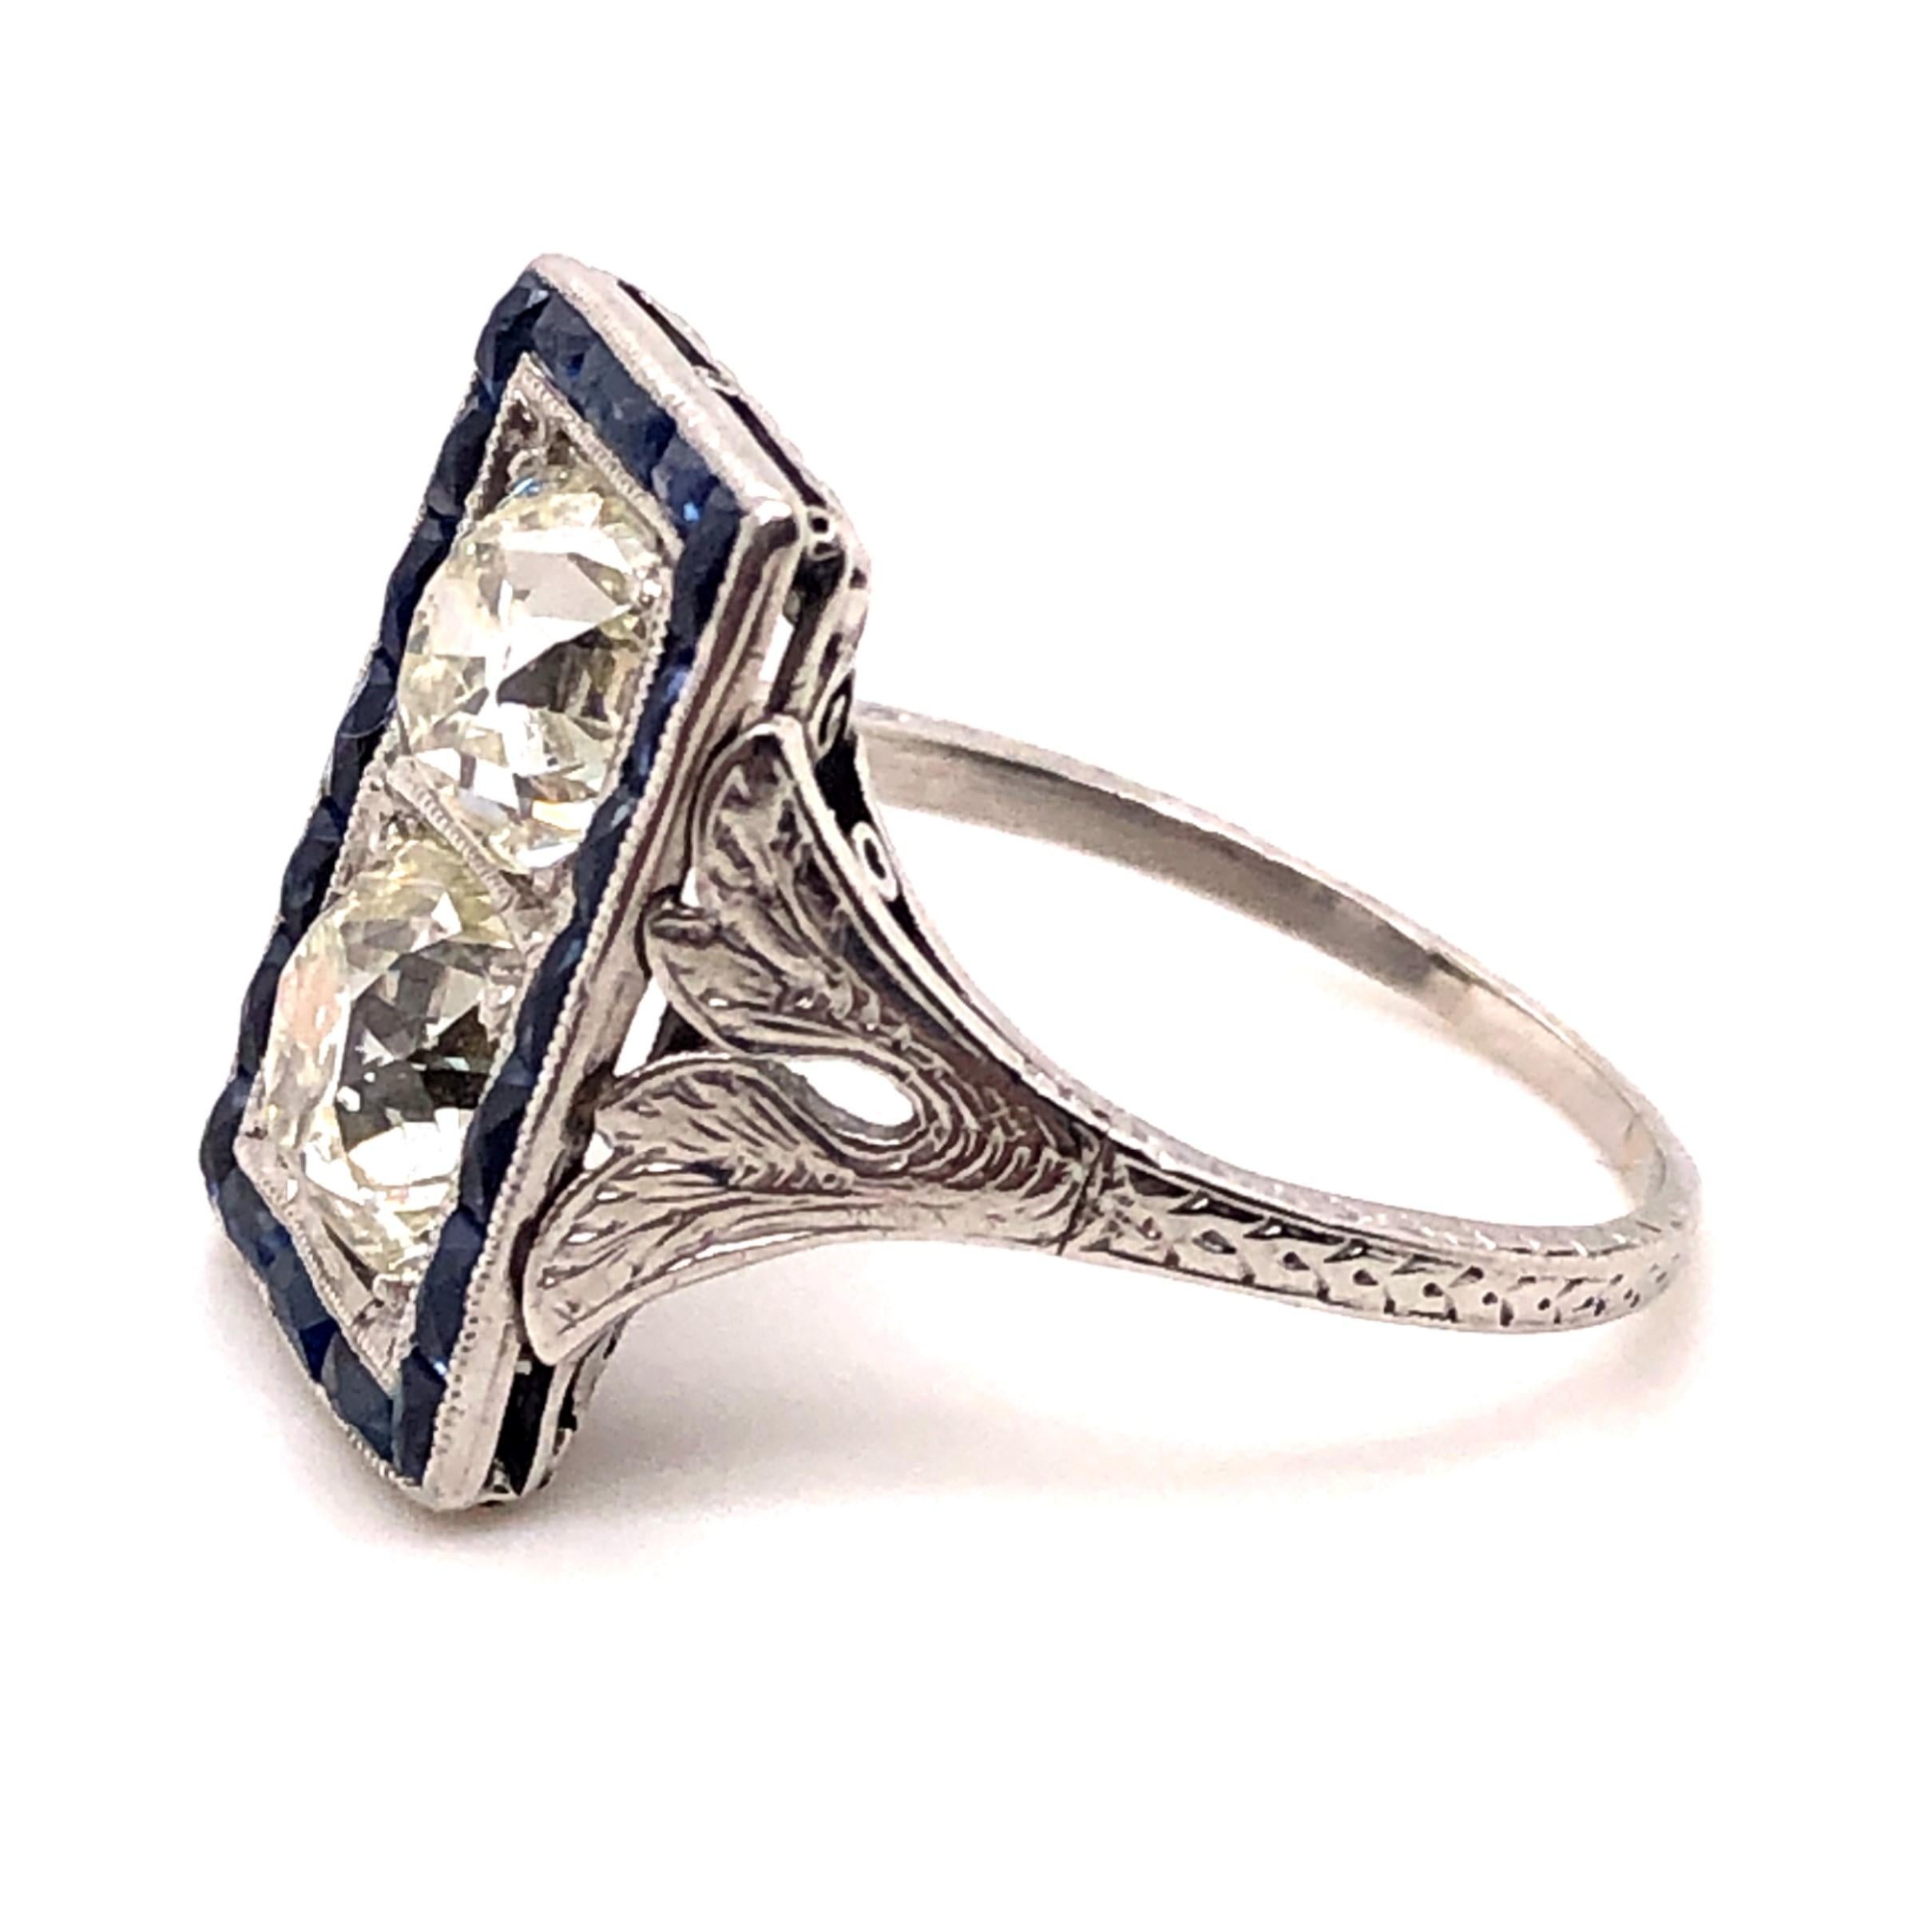 Art Deco Platinum 2.58 total carat weight Old Mine Cut diamond ring. The Old Mine Cut diamonds are set Toi Et Moi style and grade as M color SI1 clarity by GIA  Graduate Gemologists. Surrounding the two center diamonds are French Cut sapphires